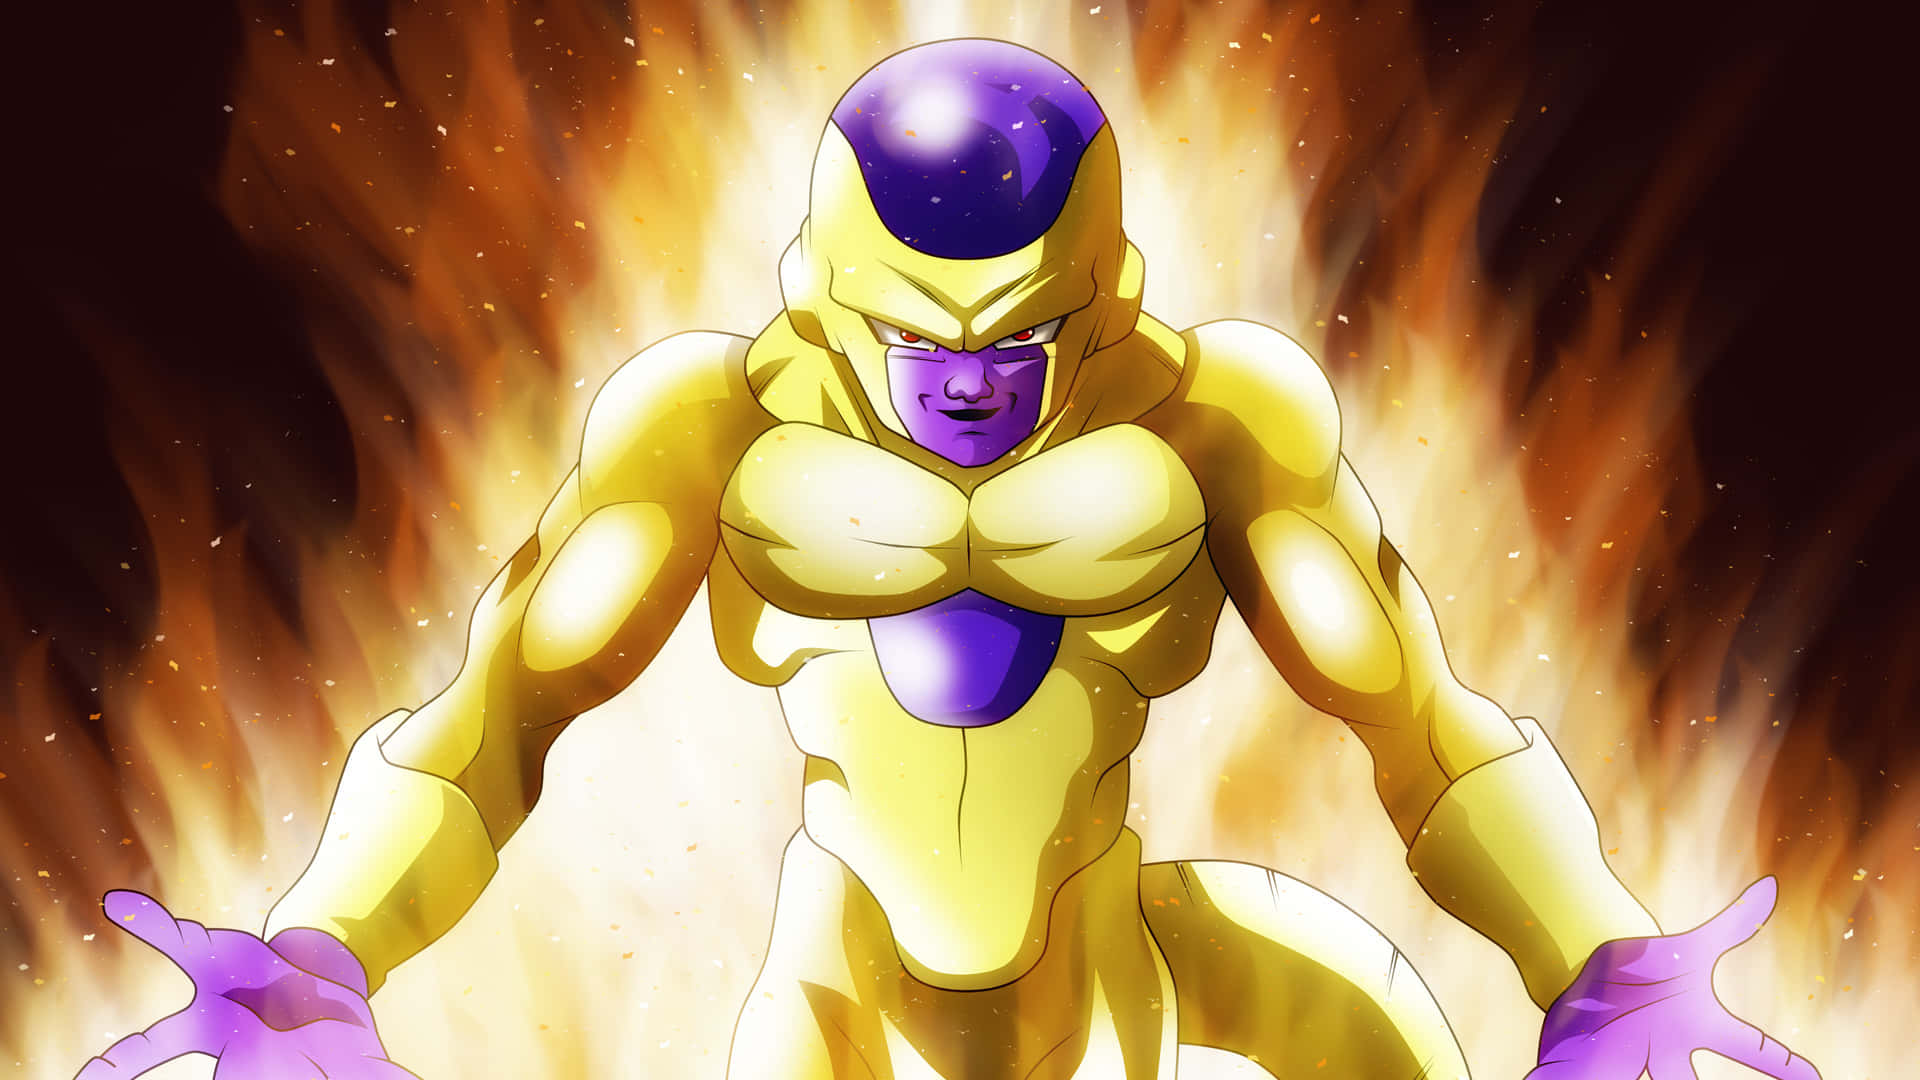 An illustration of Golden Frieza's fearsome power. Wallpaper